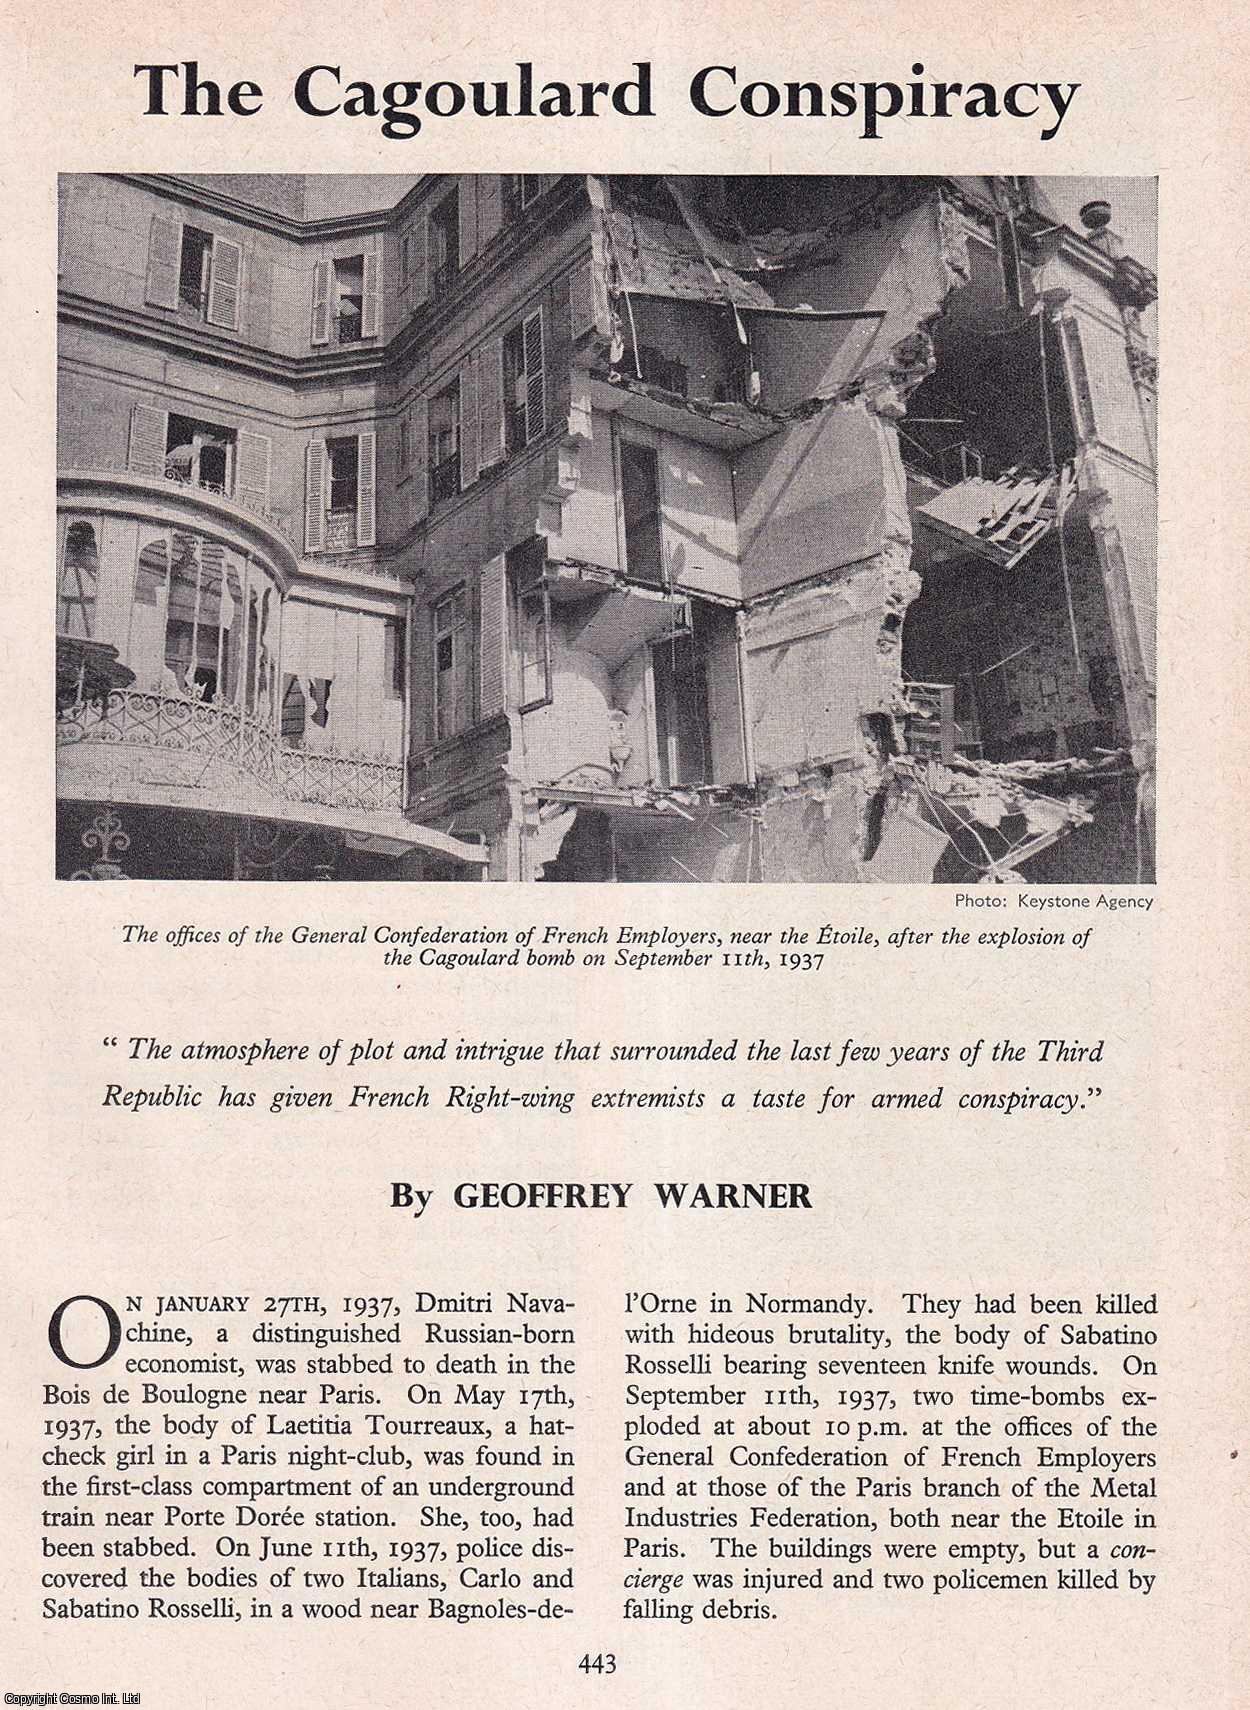 Geoffrey Warner - The Cagoulard Conspiracy. An original article from History Today magazine, 1960.